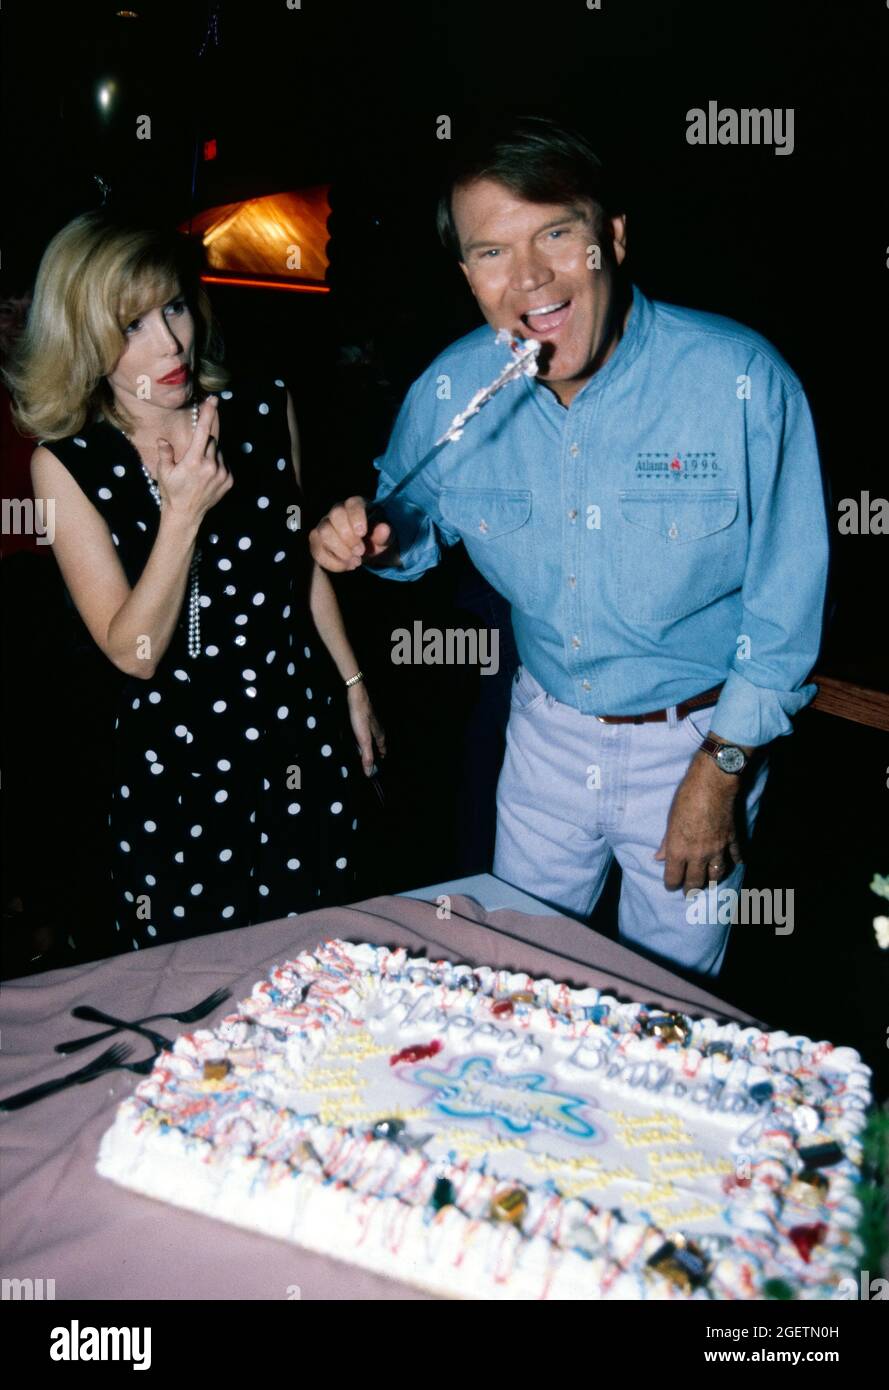 Glen Campbell pretends to lick the knife after cutting into his birthday cake at his surprise 60th birthday celebration on April 21, 1996 in Branson, Missouri. His wife, Kim looks on after sampling the icing on her fingers. Glen Campbell's actual birth date was April 22, 1936 Stock Photo